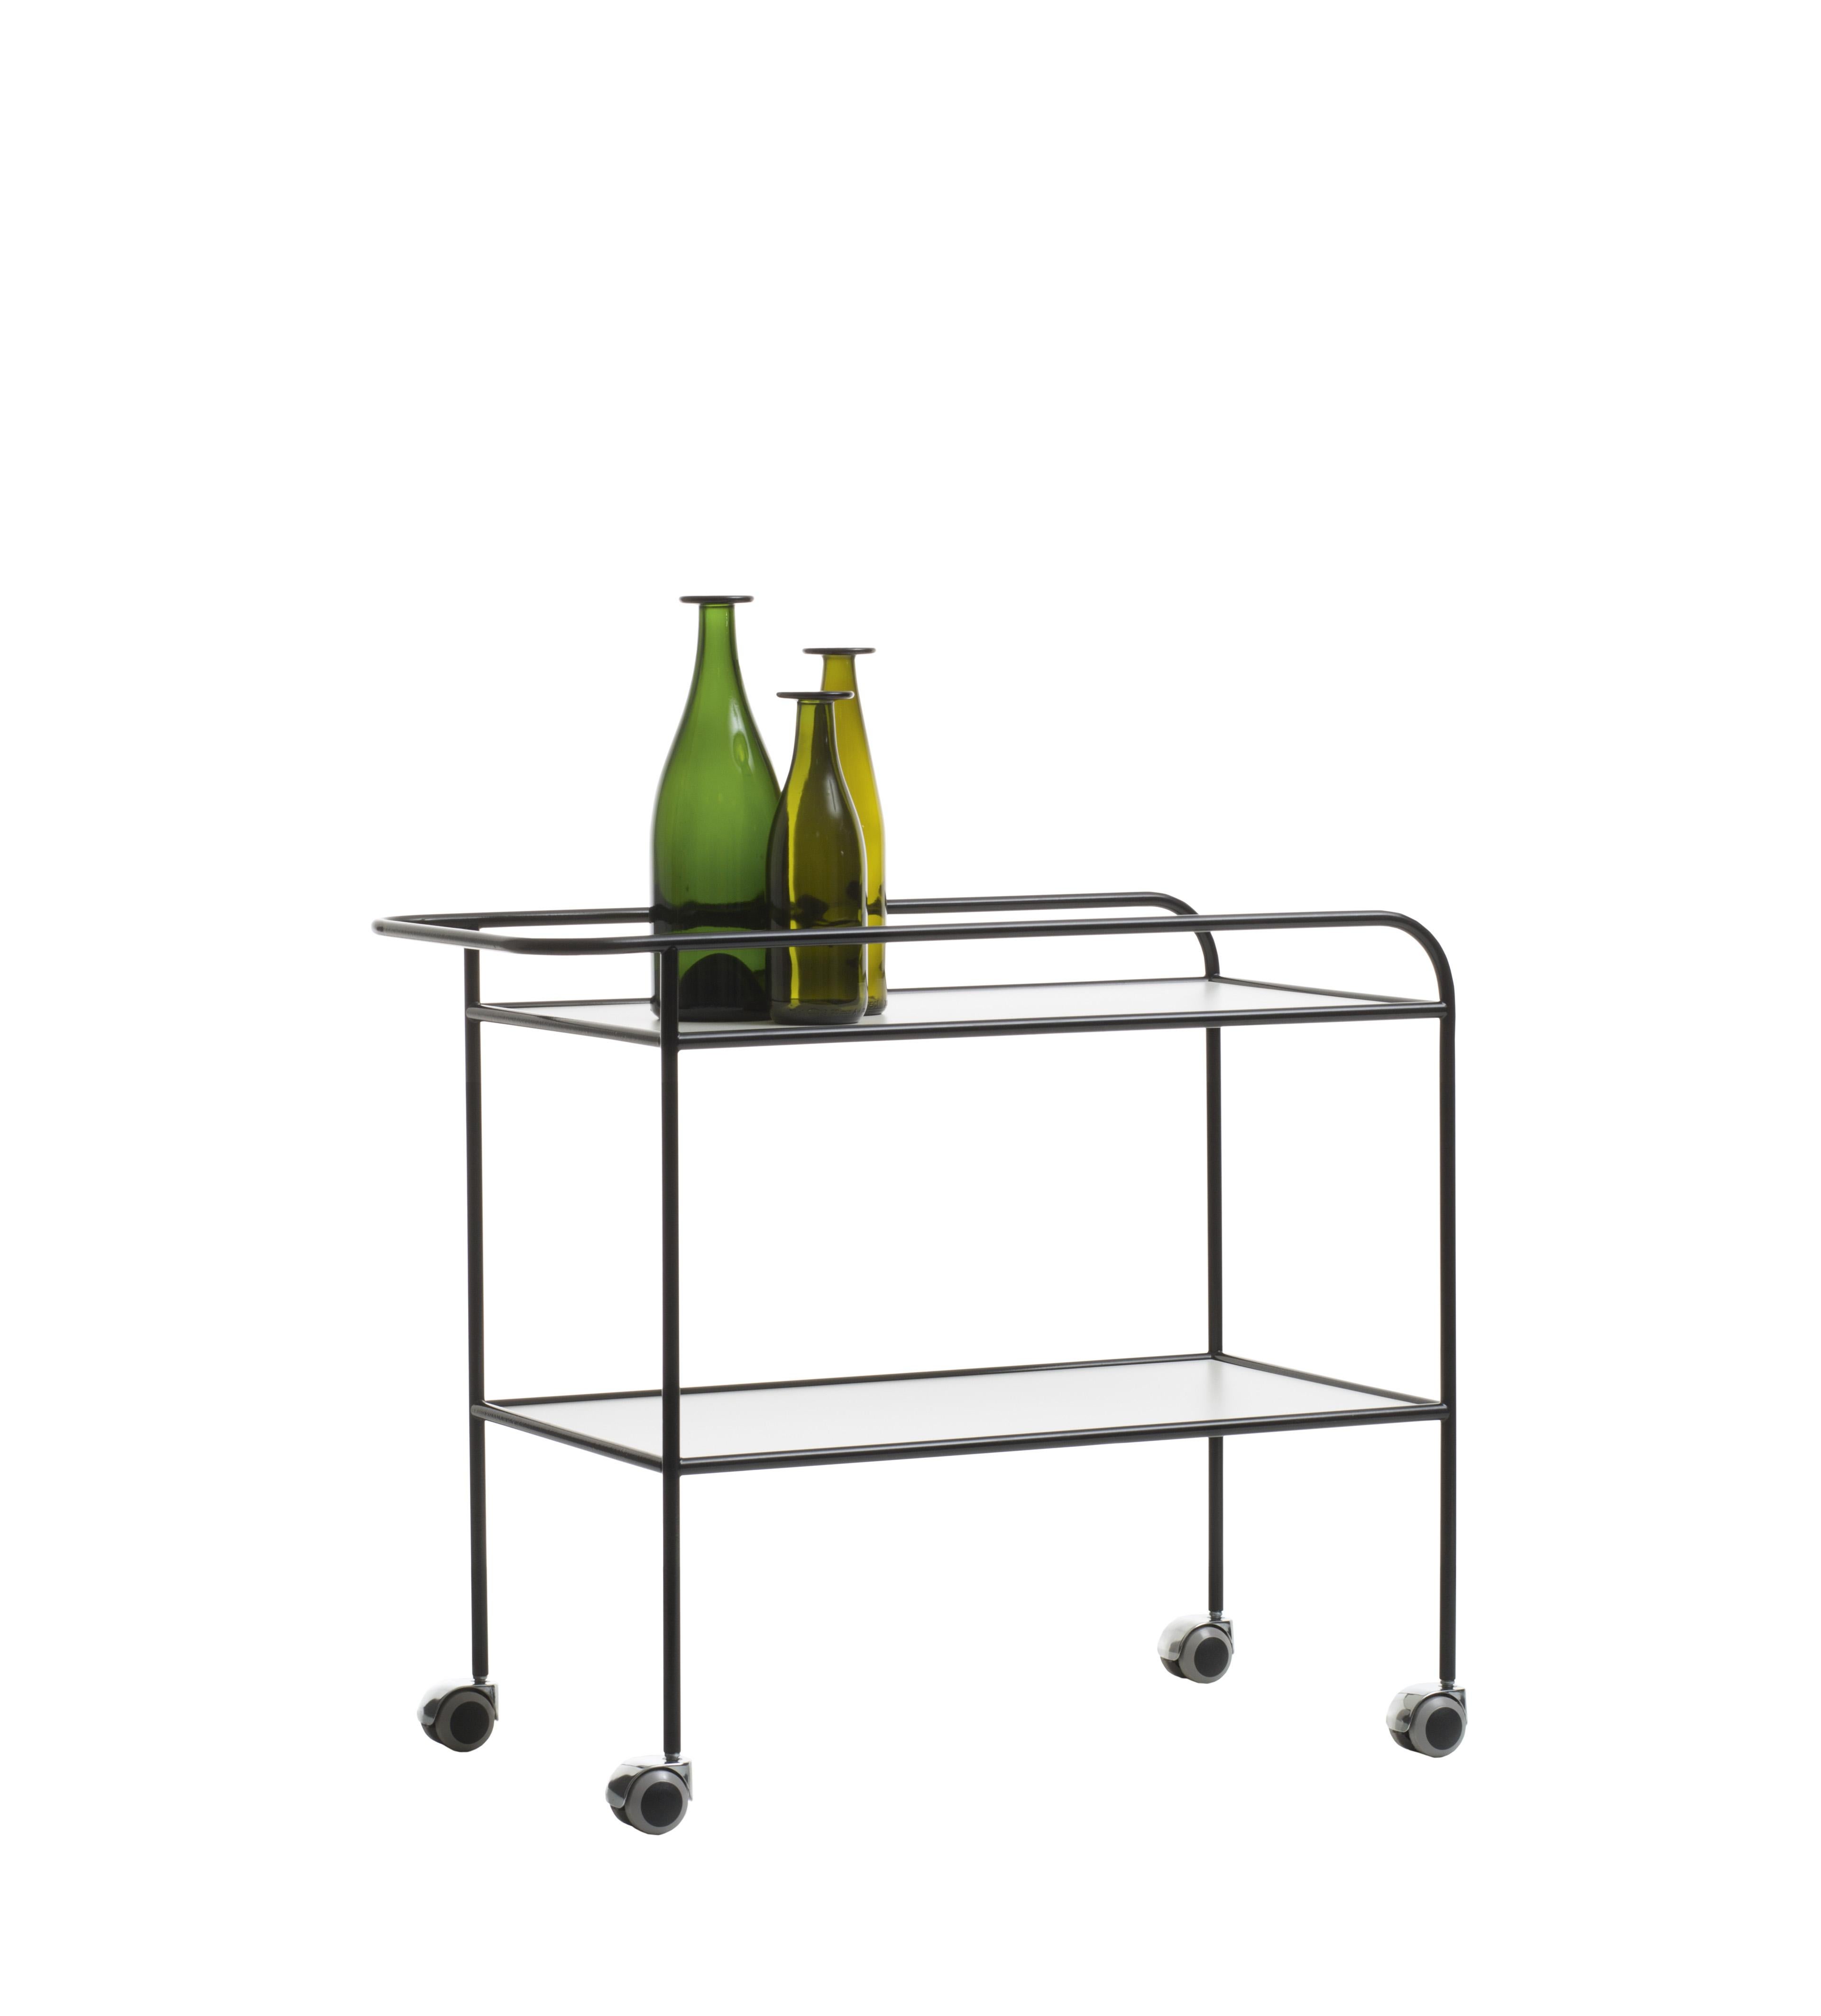 Originally designed in 1968, the steel pipe drink trolley, by Shiro Kuramata, is still strikingly contemporary, a reflection of the research in which form and function are immediately evident, but contradistinguished by the refined aesthetics of the